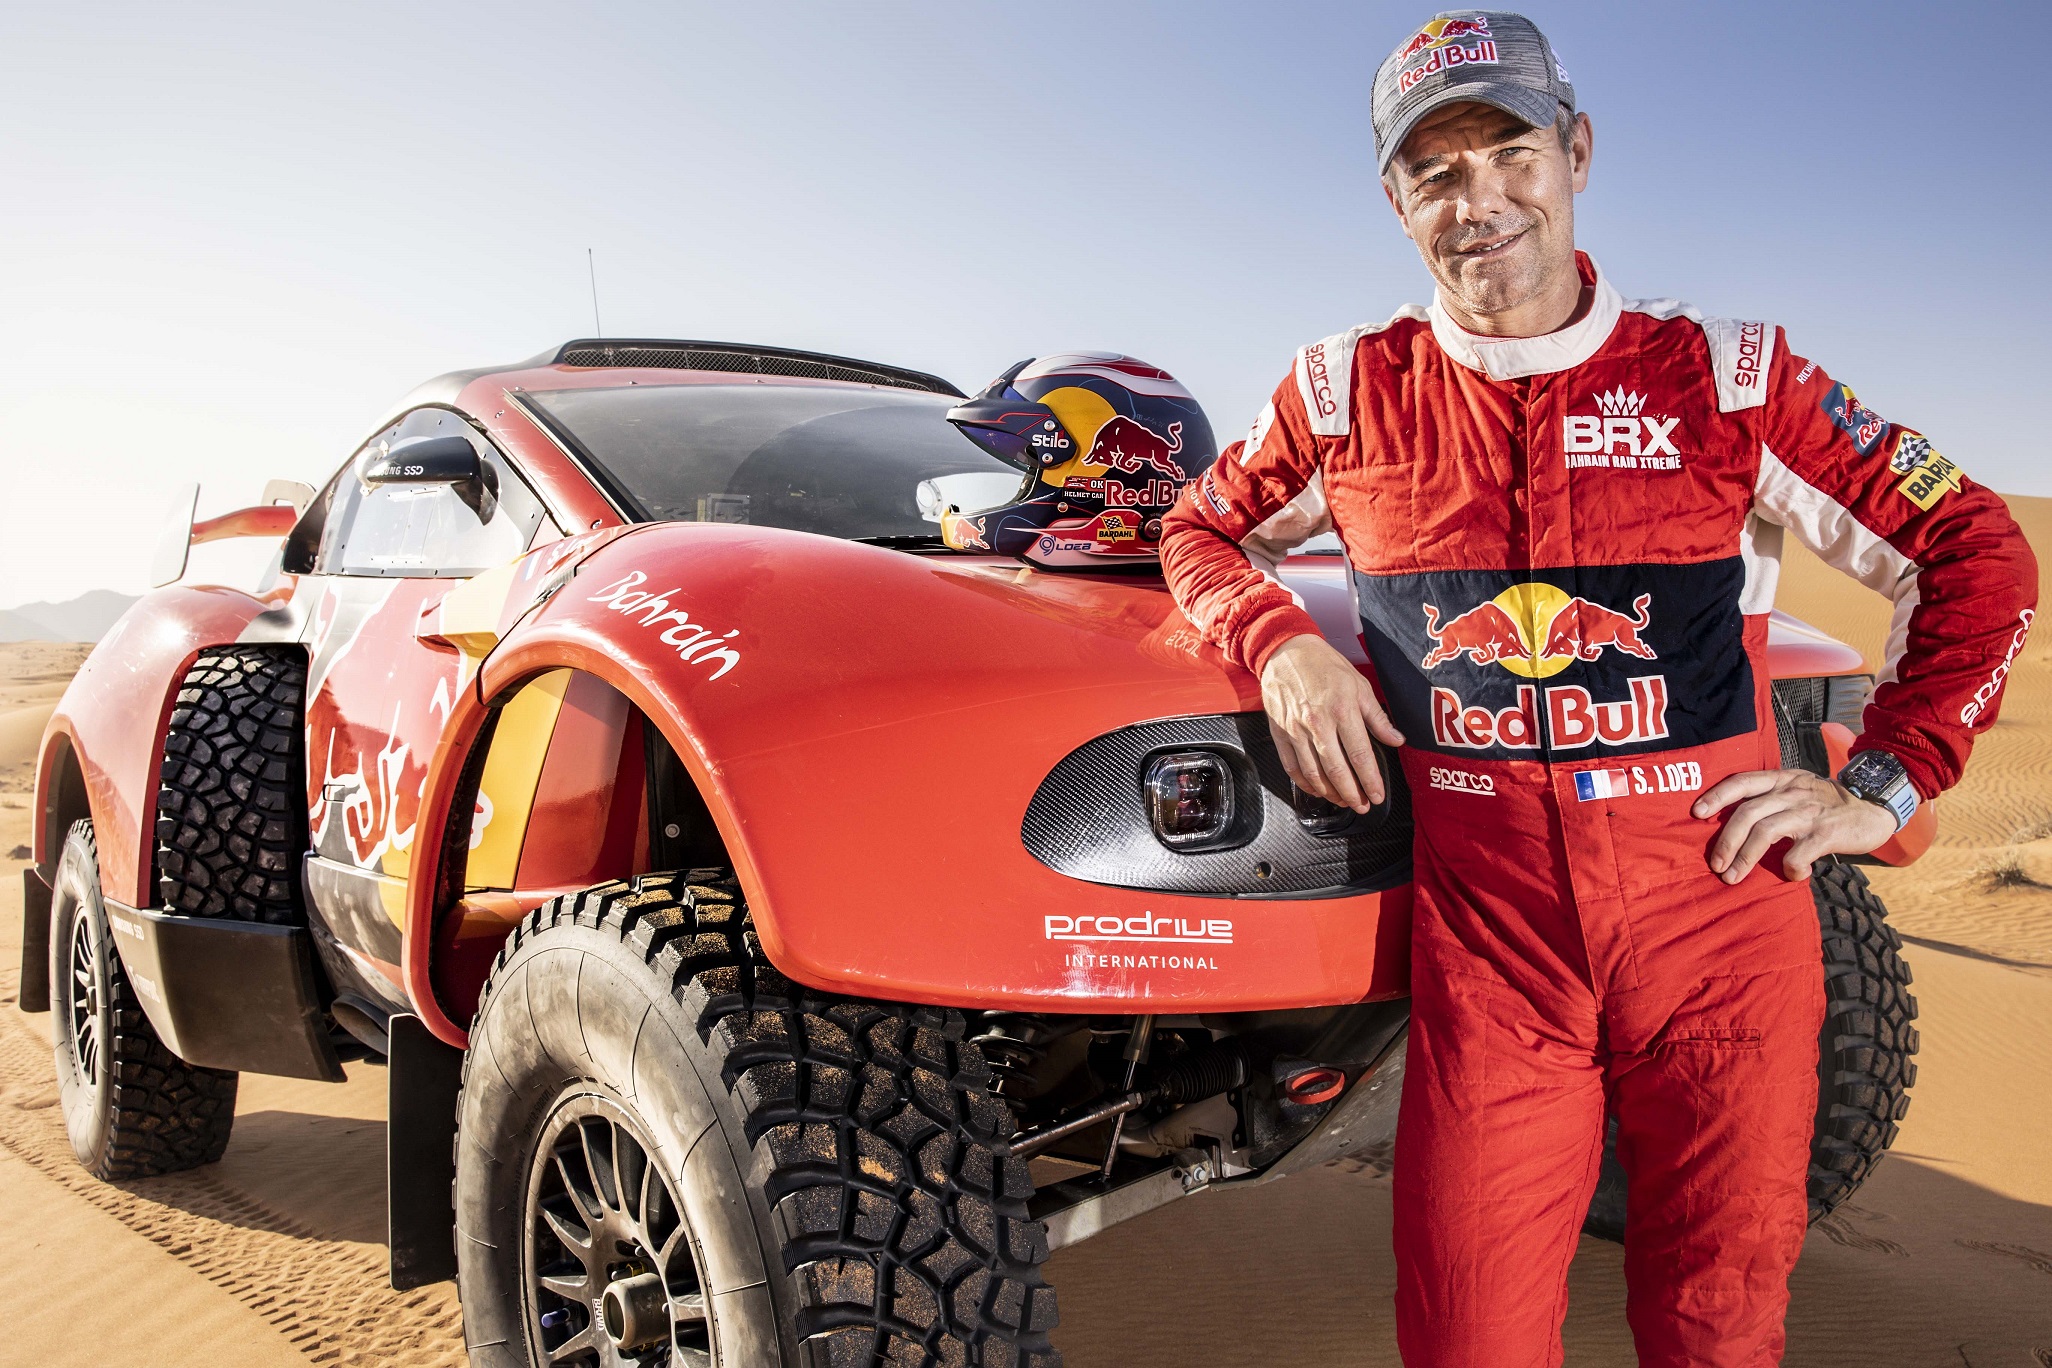 BAHRAIN RAID XTREME TO COMPETE AT DAKAR  IN SAUDI ON SUSTAINABLE FUEL